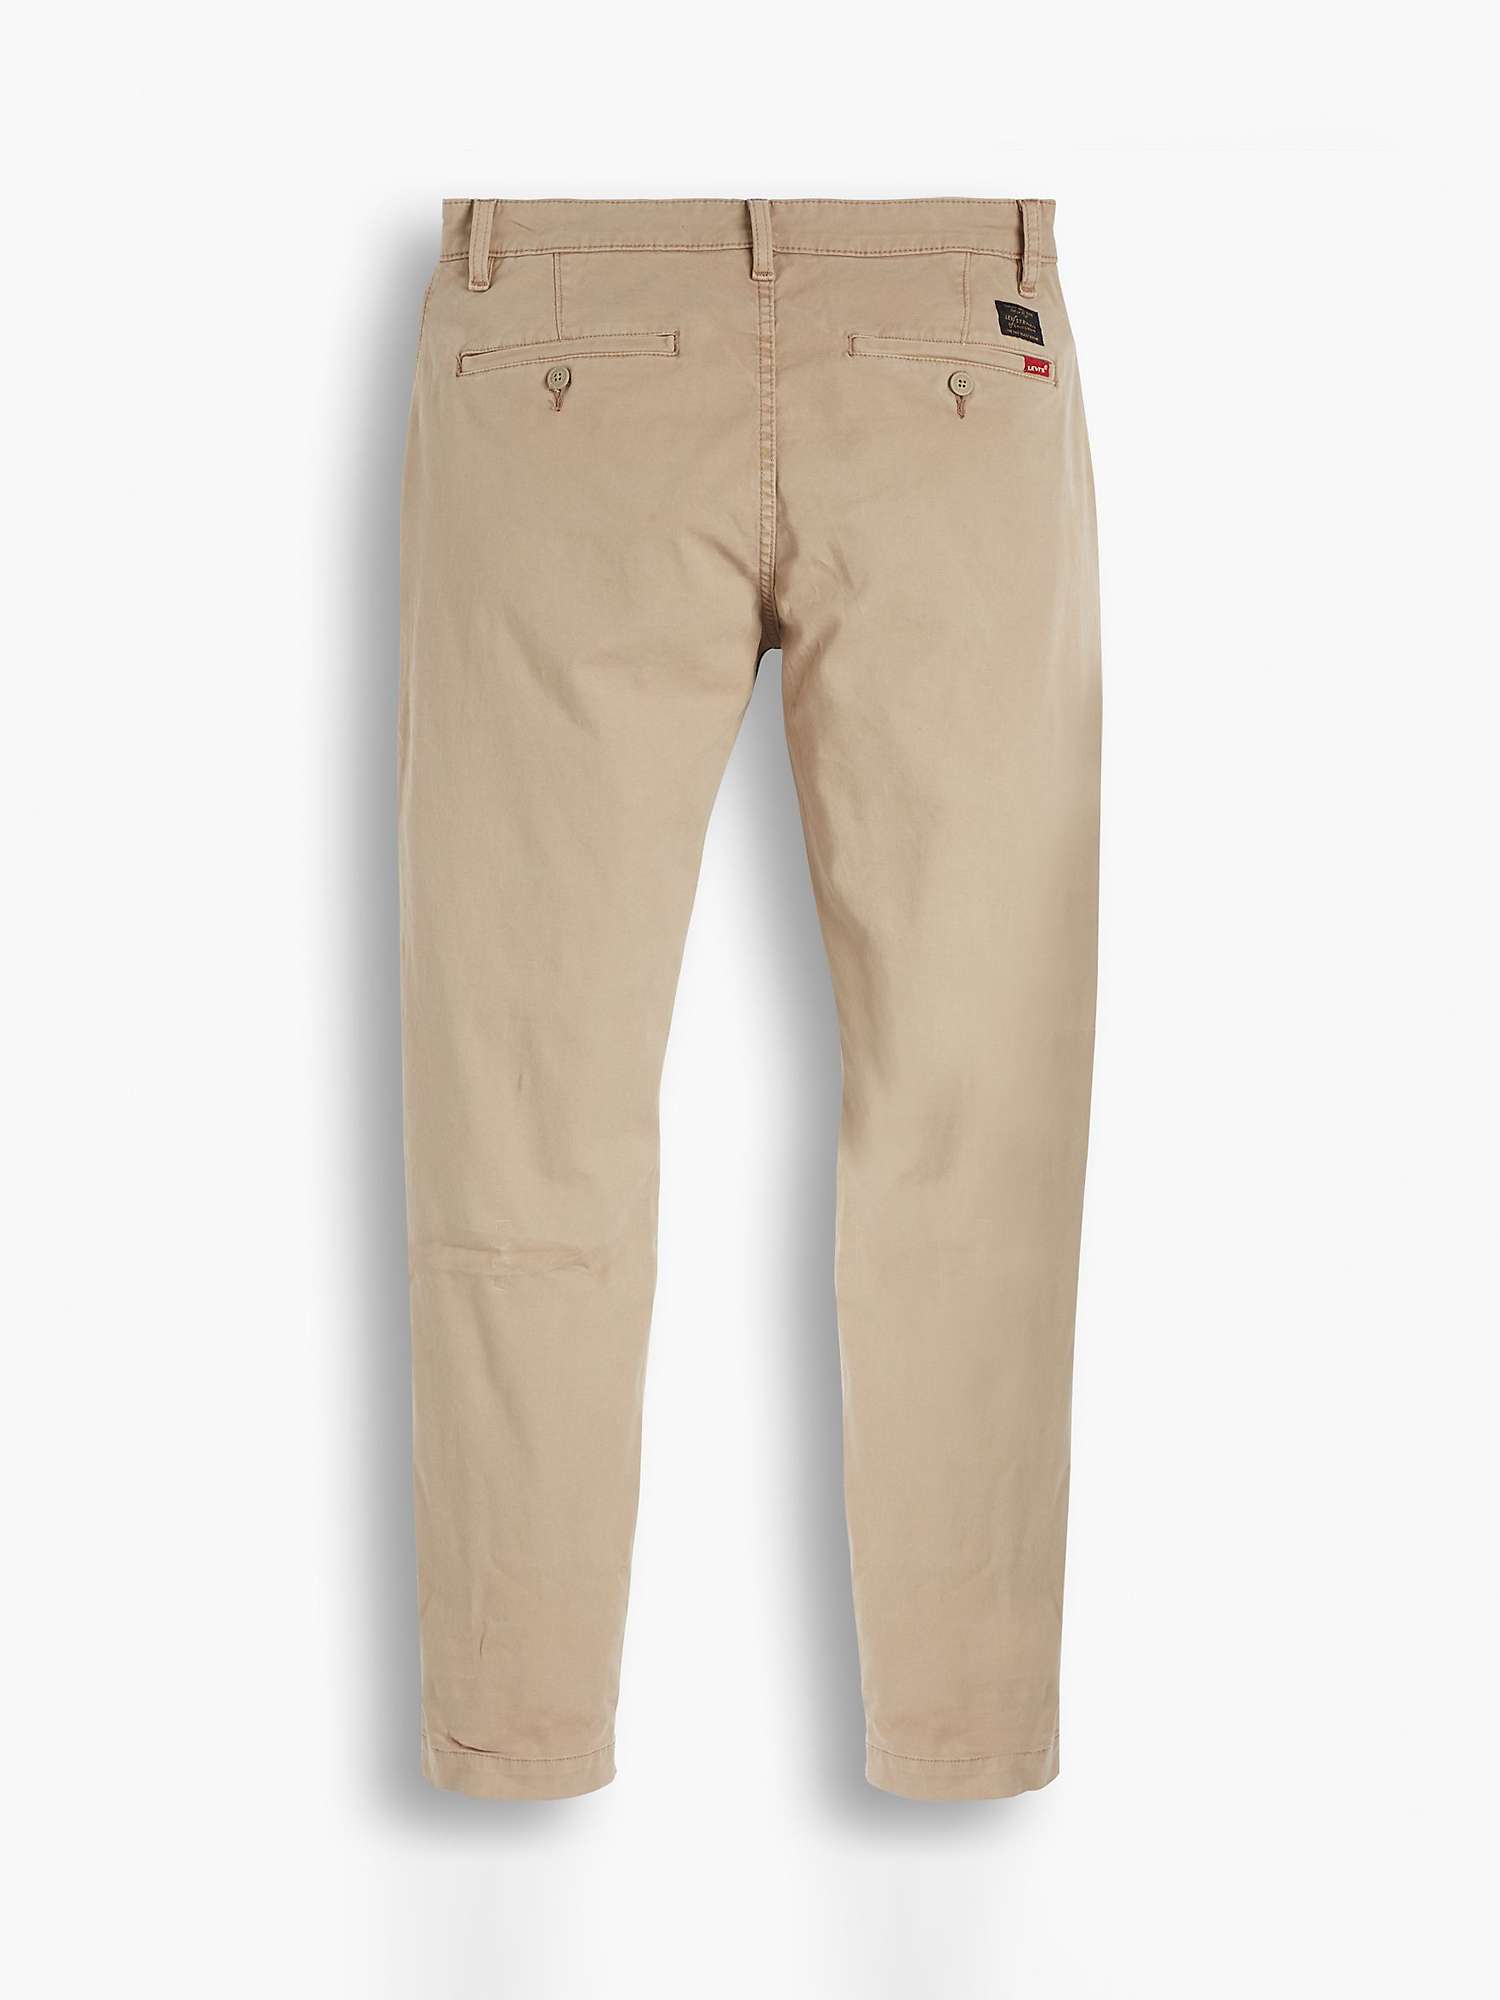 Buy Levi's Regular Fit Chinos, True Chino GDCCUB Online at johnlewis.com